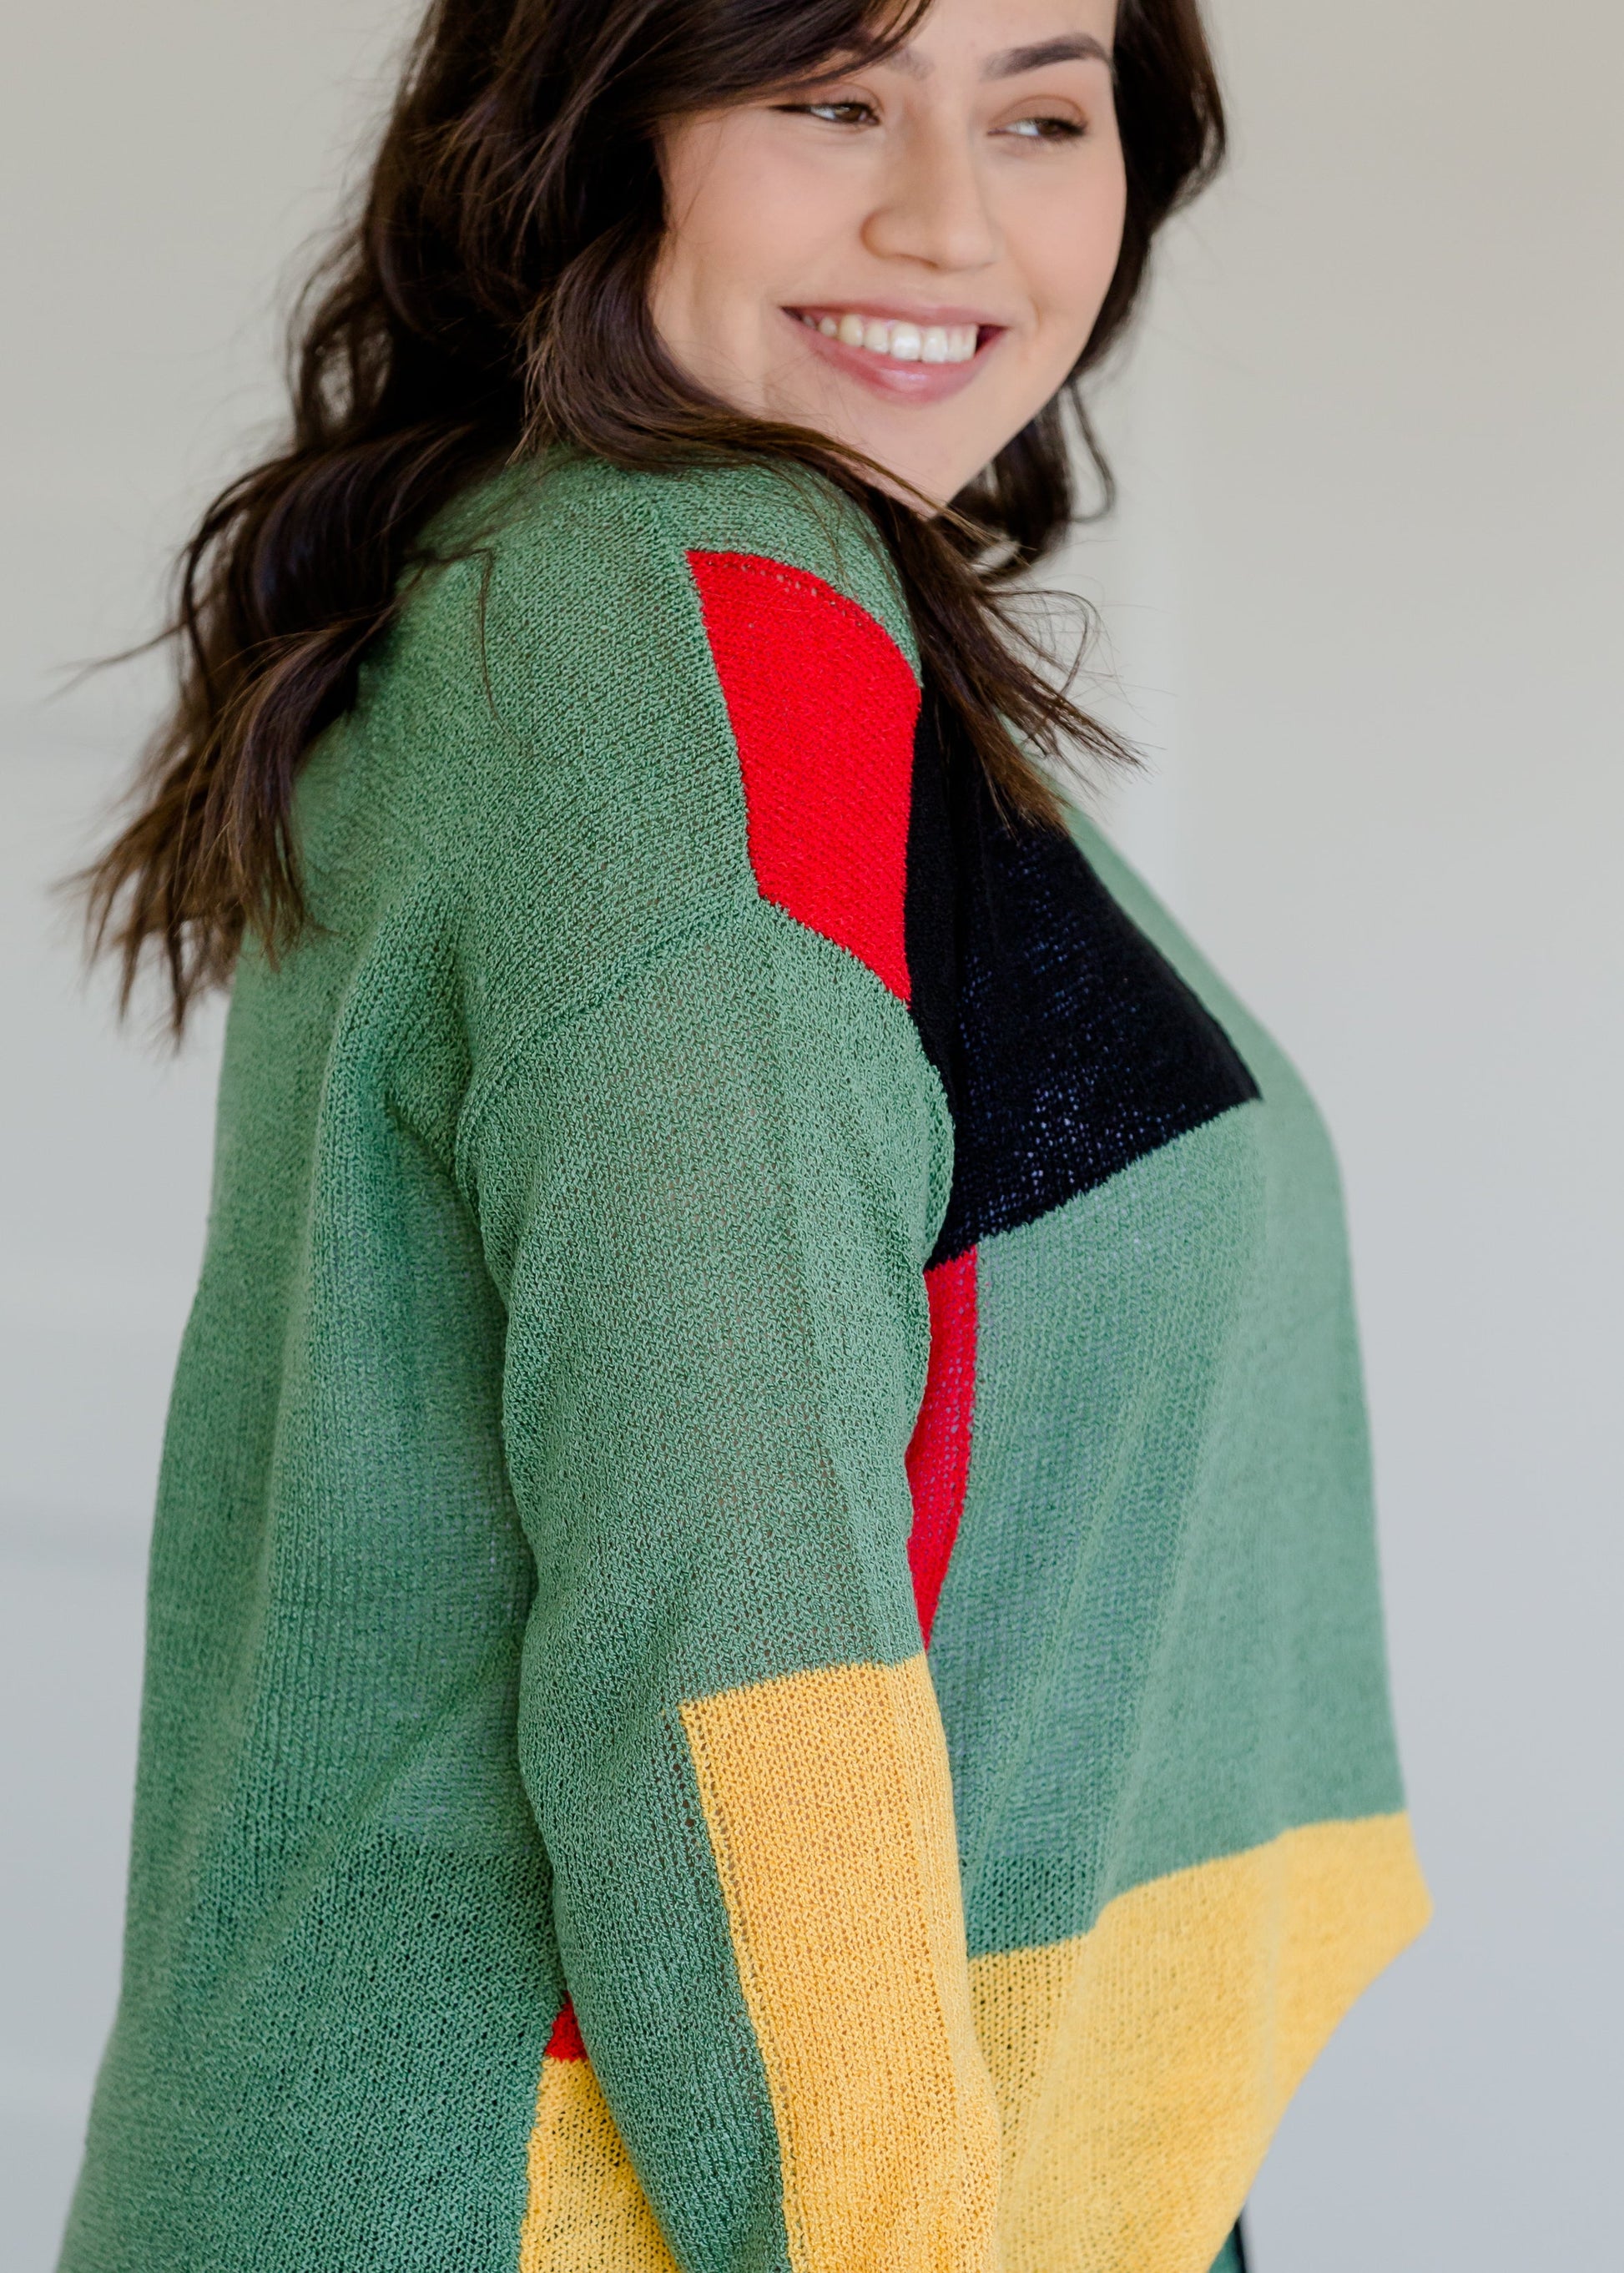 Colorblock Green Patch Sweater - FINAL SALE Tops